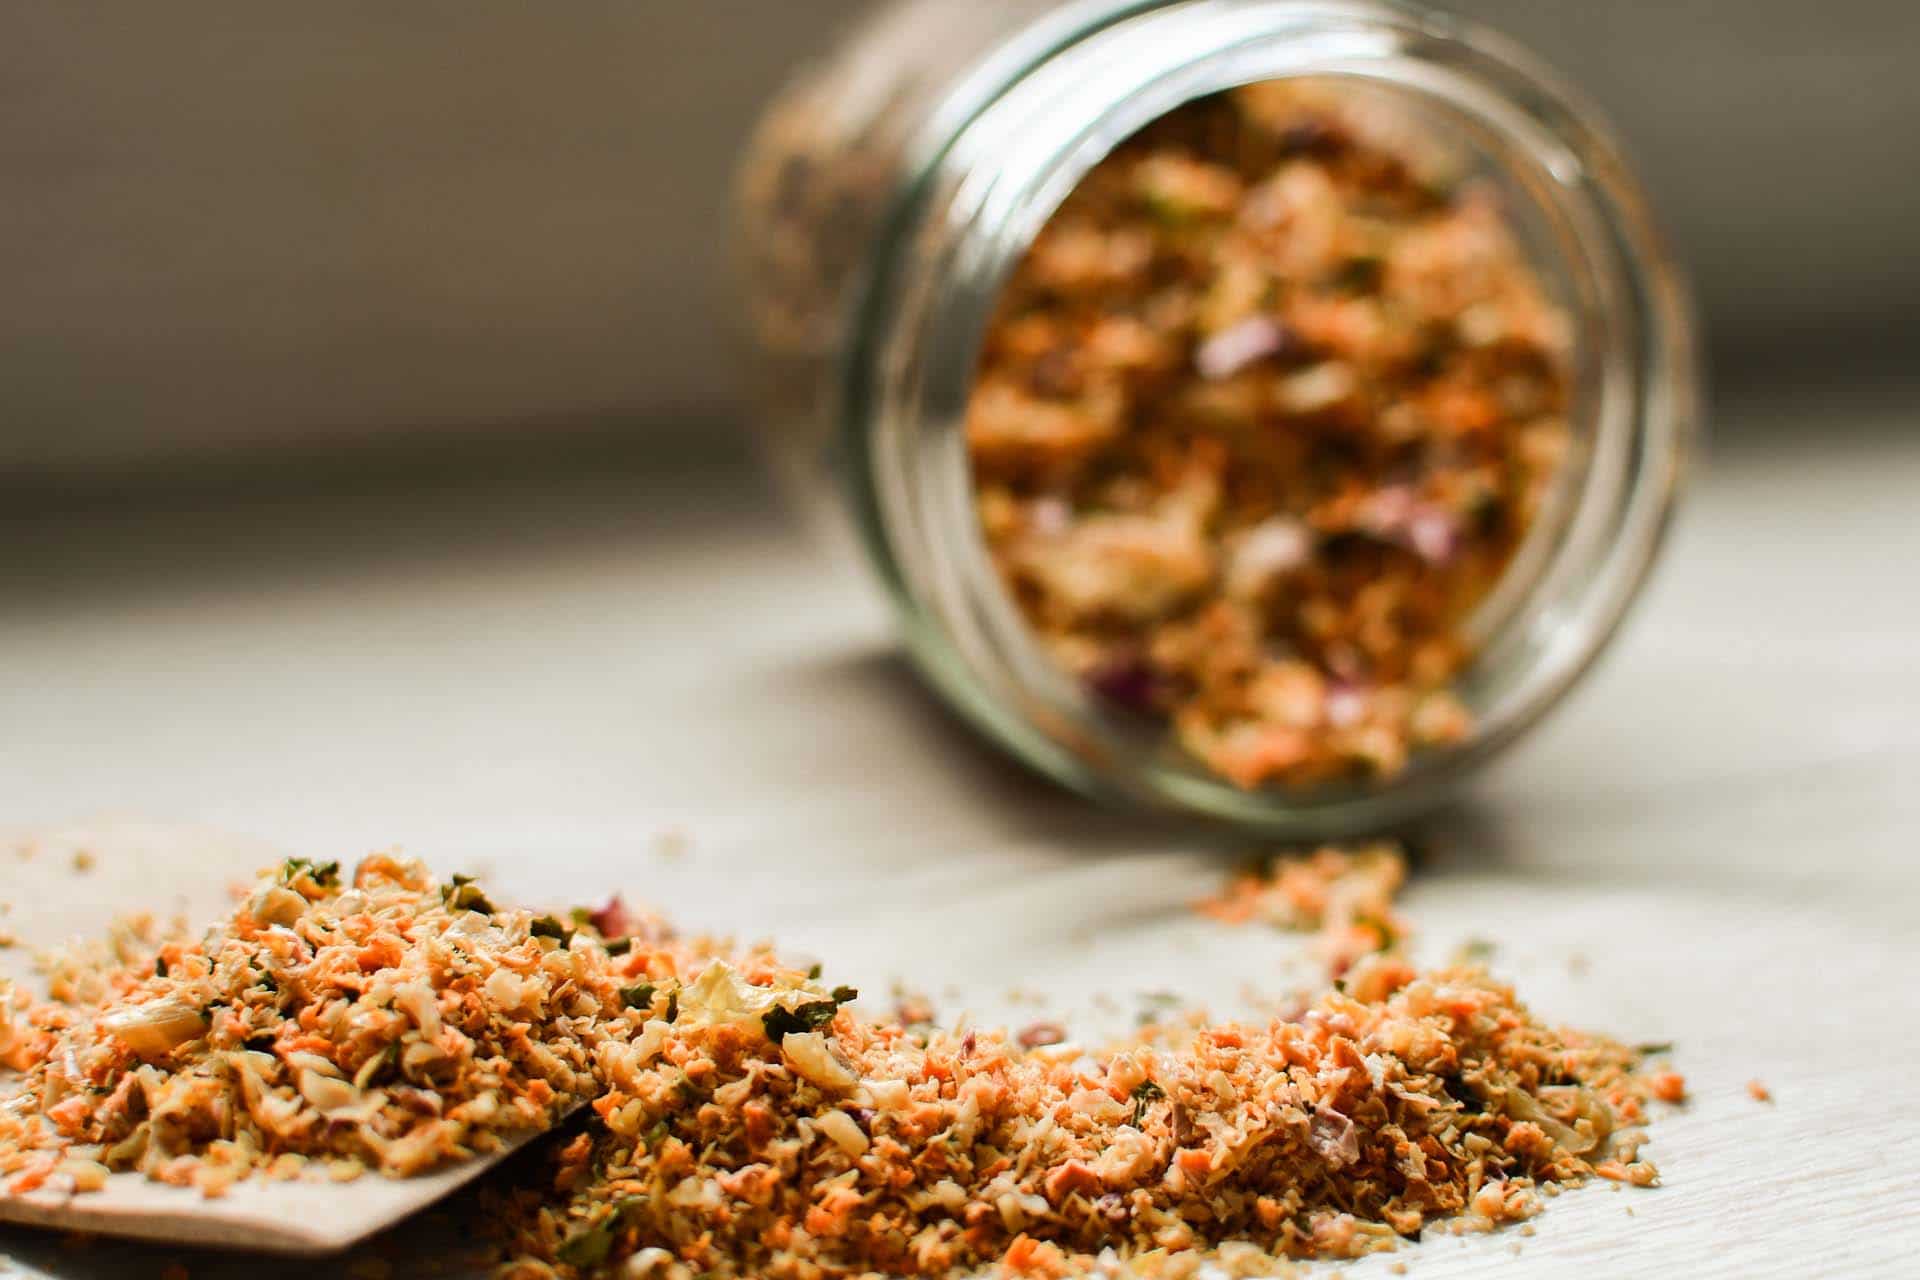 A jar with healthy homemade dried vegetables